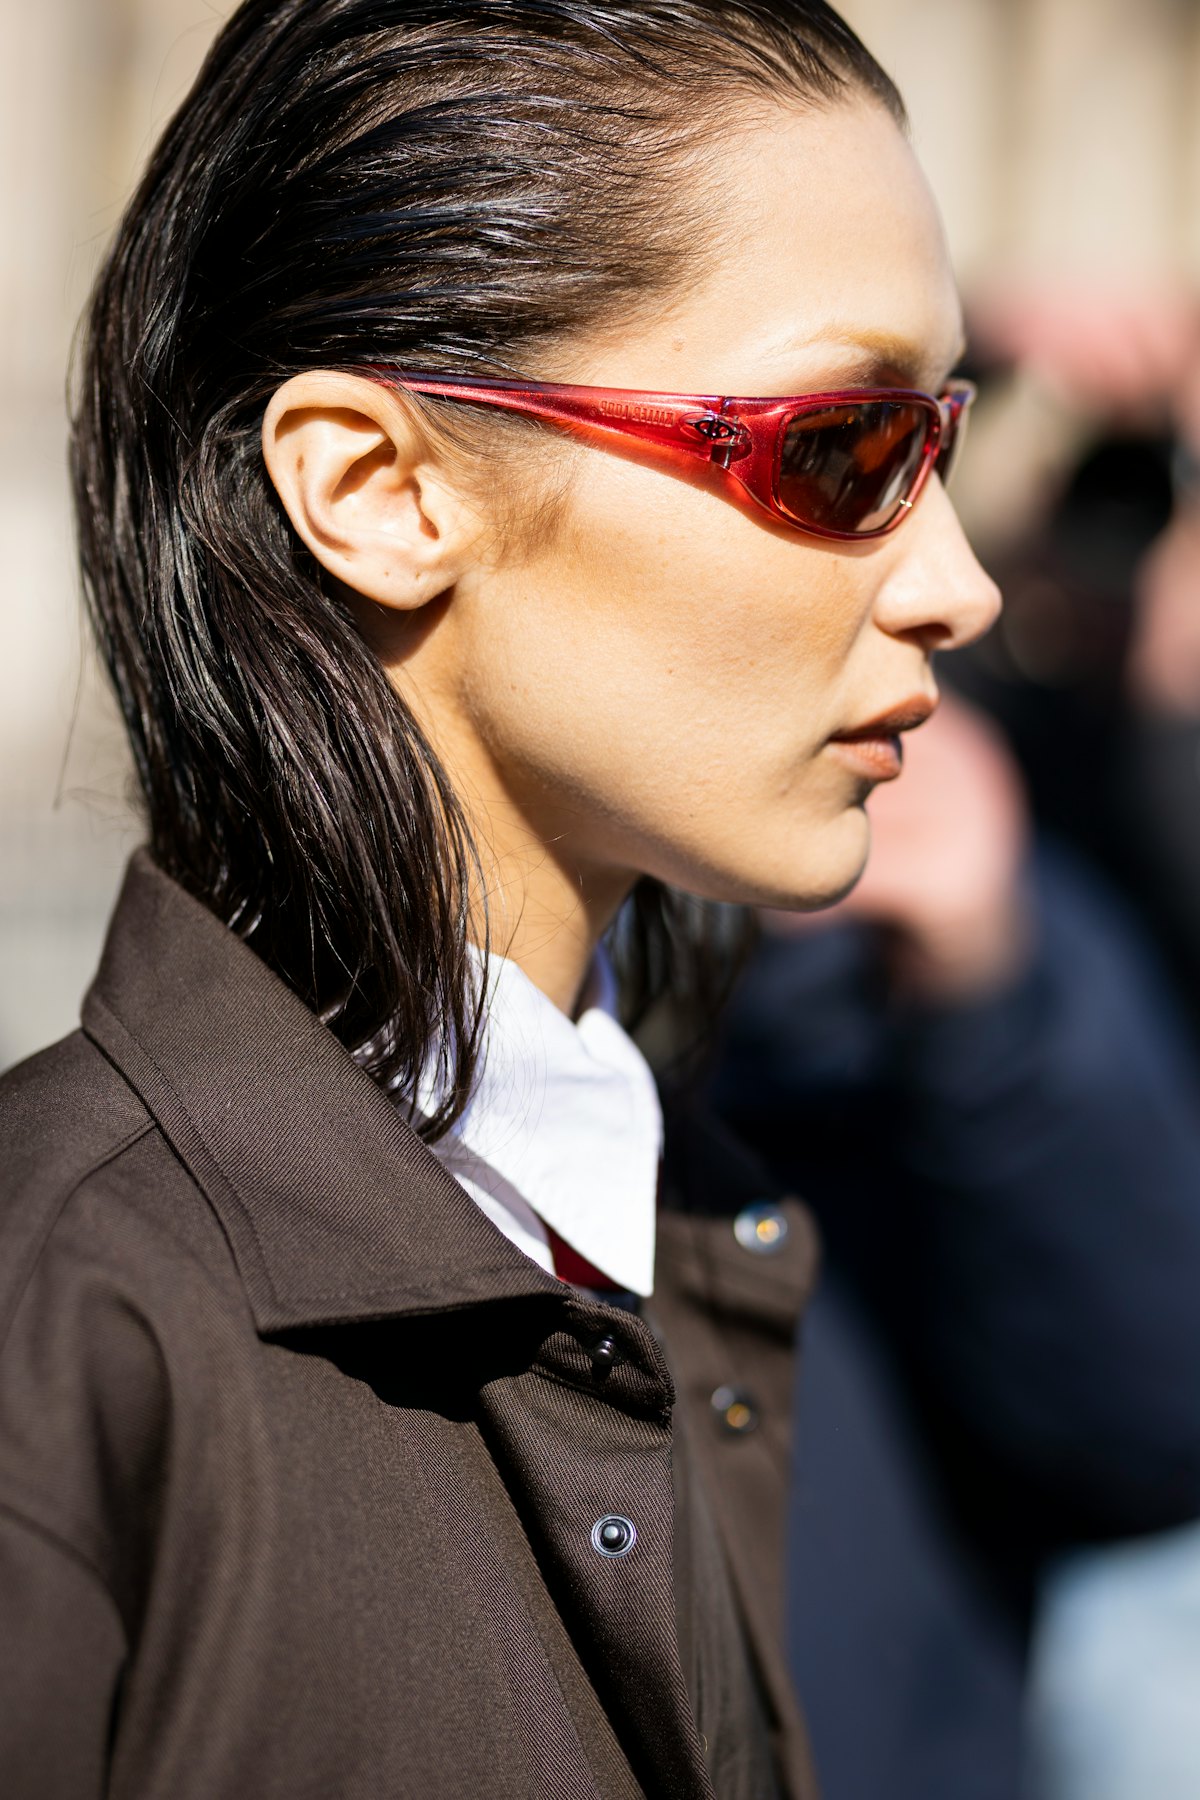 At Paris Fashion Week F/W 2022, the wet hair at Sacai was one of the best hair looks.